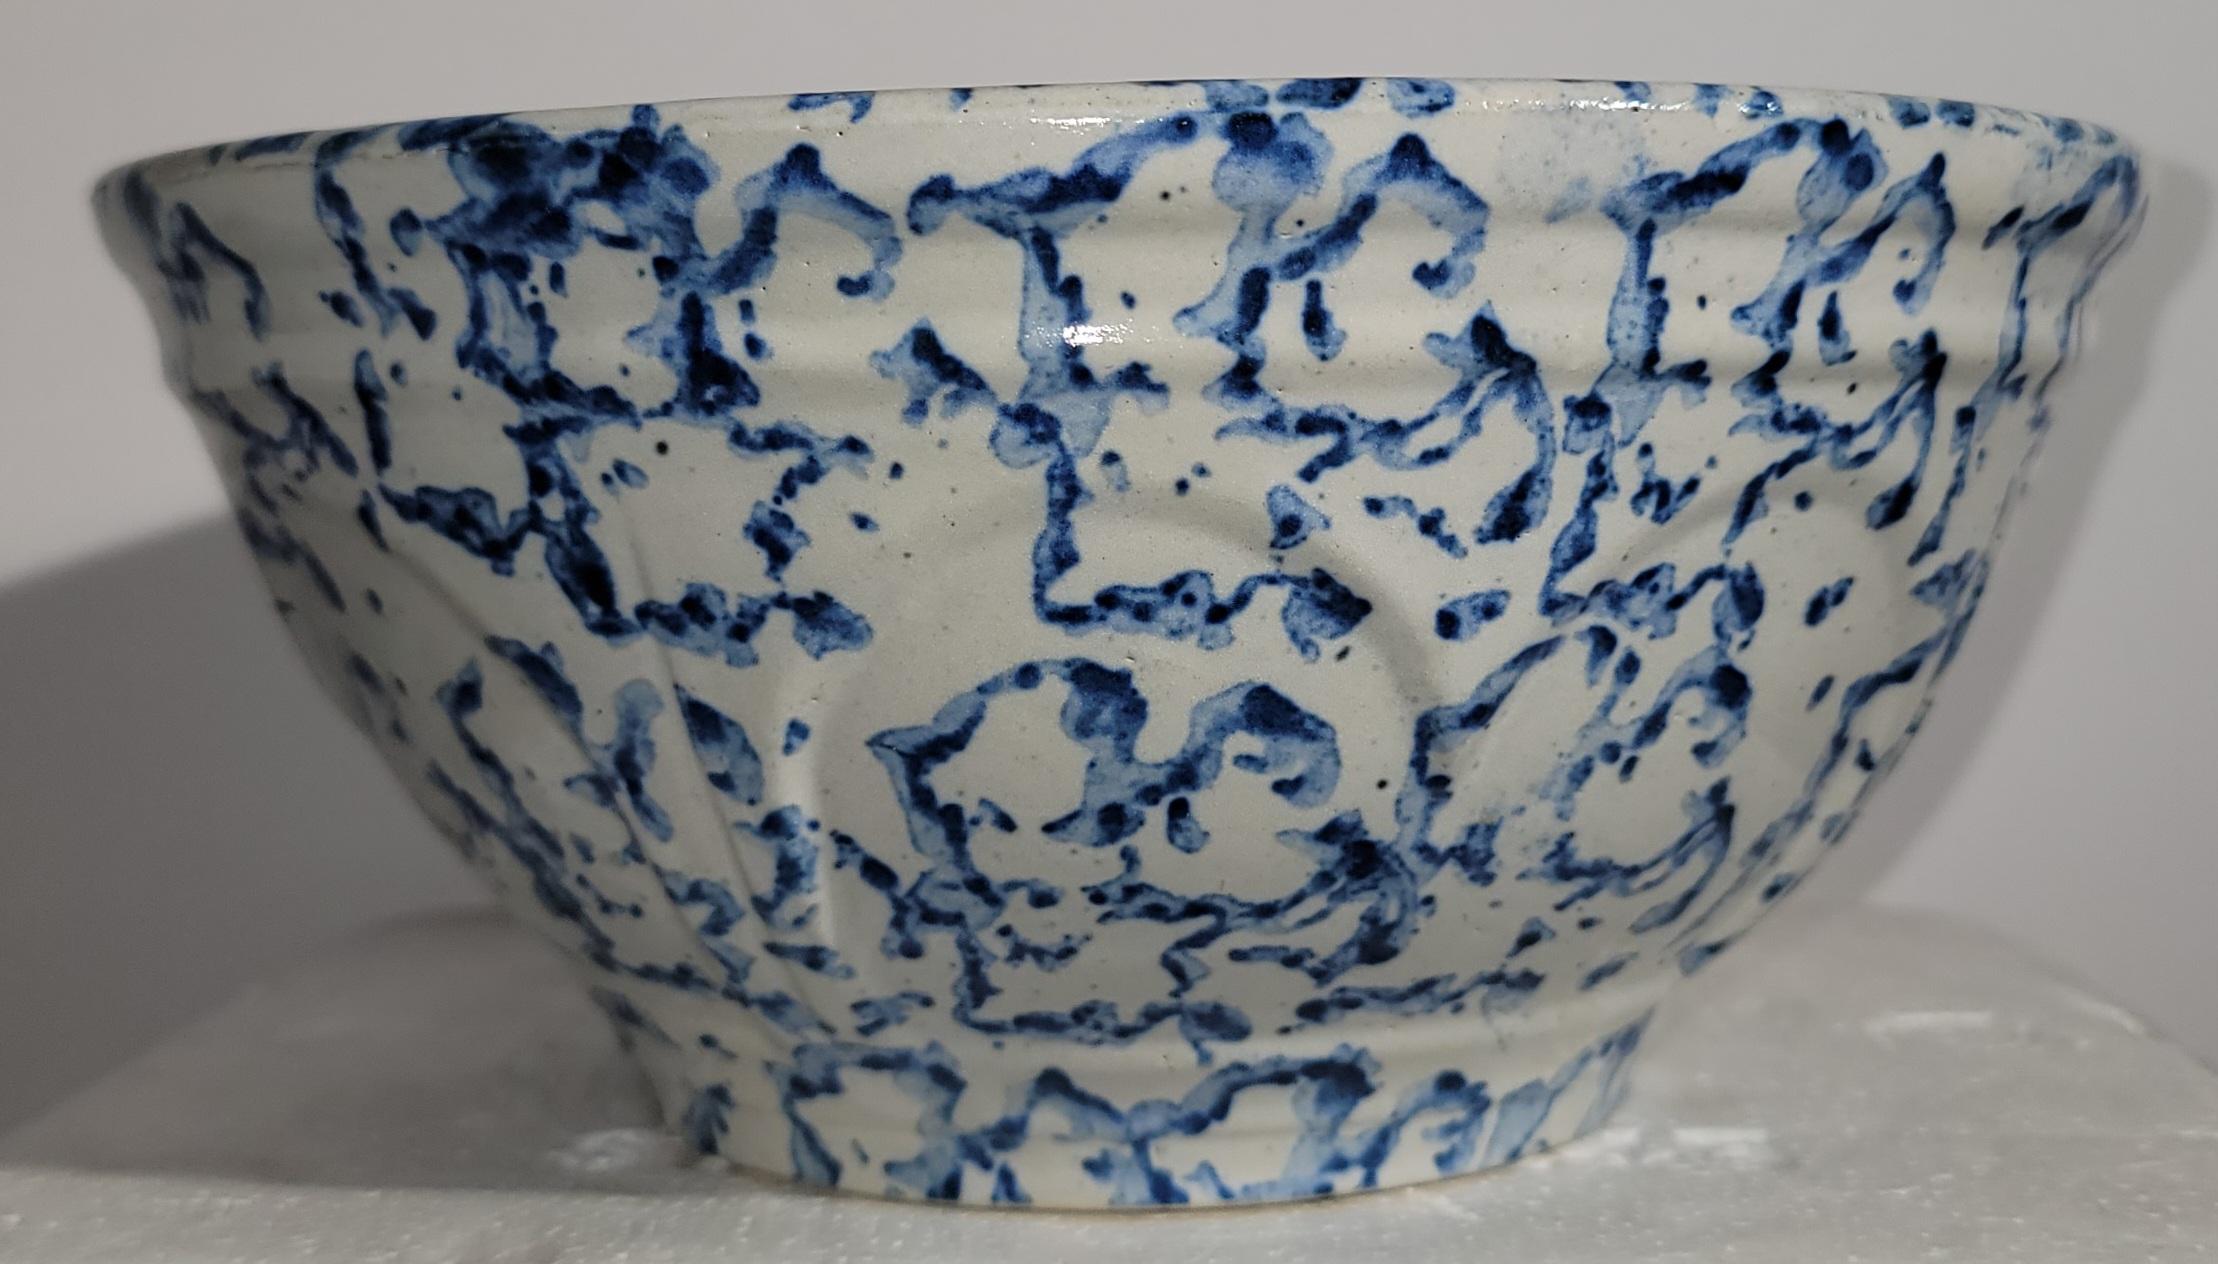 19thc sponge ware bowl with light light blue design. The blue color is not overpowering allowing the background color to be shown. there is a scalloped texture to the going throughout the sides. Wonderful made bowl with great wear and patina. 